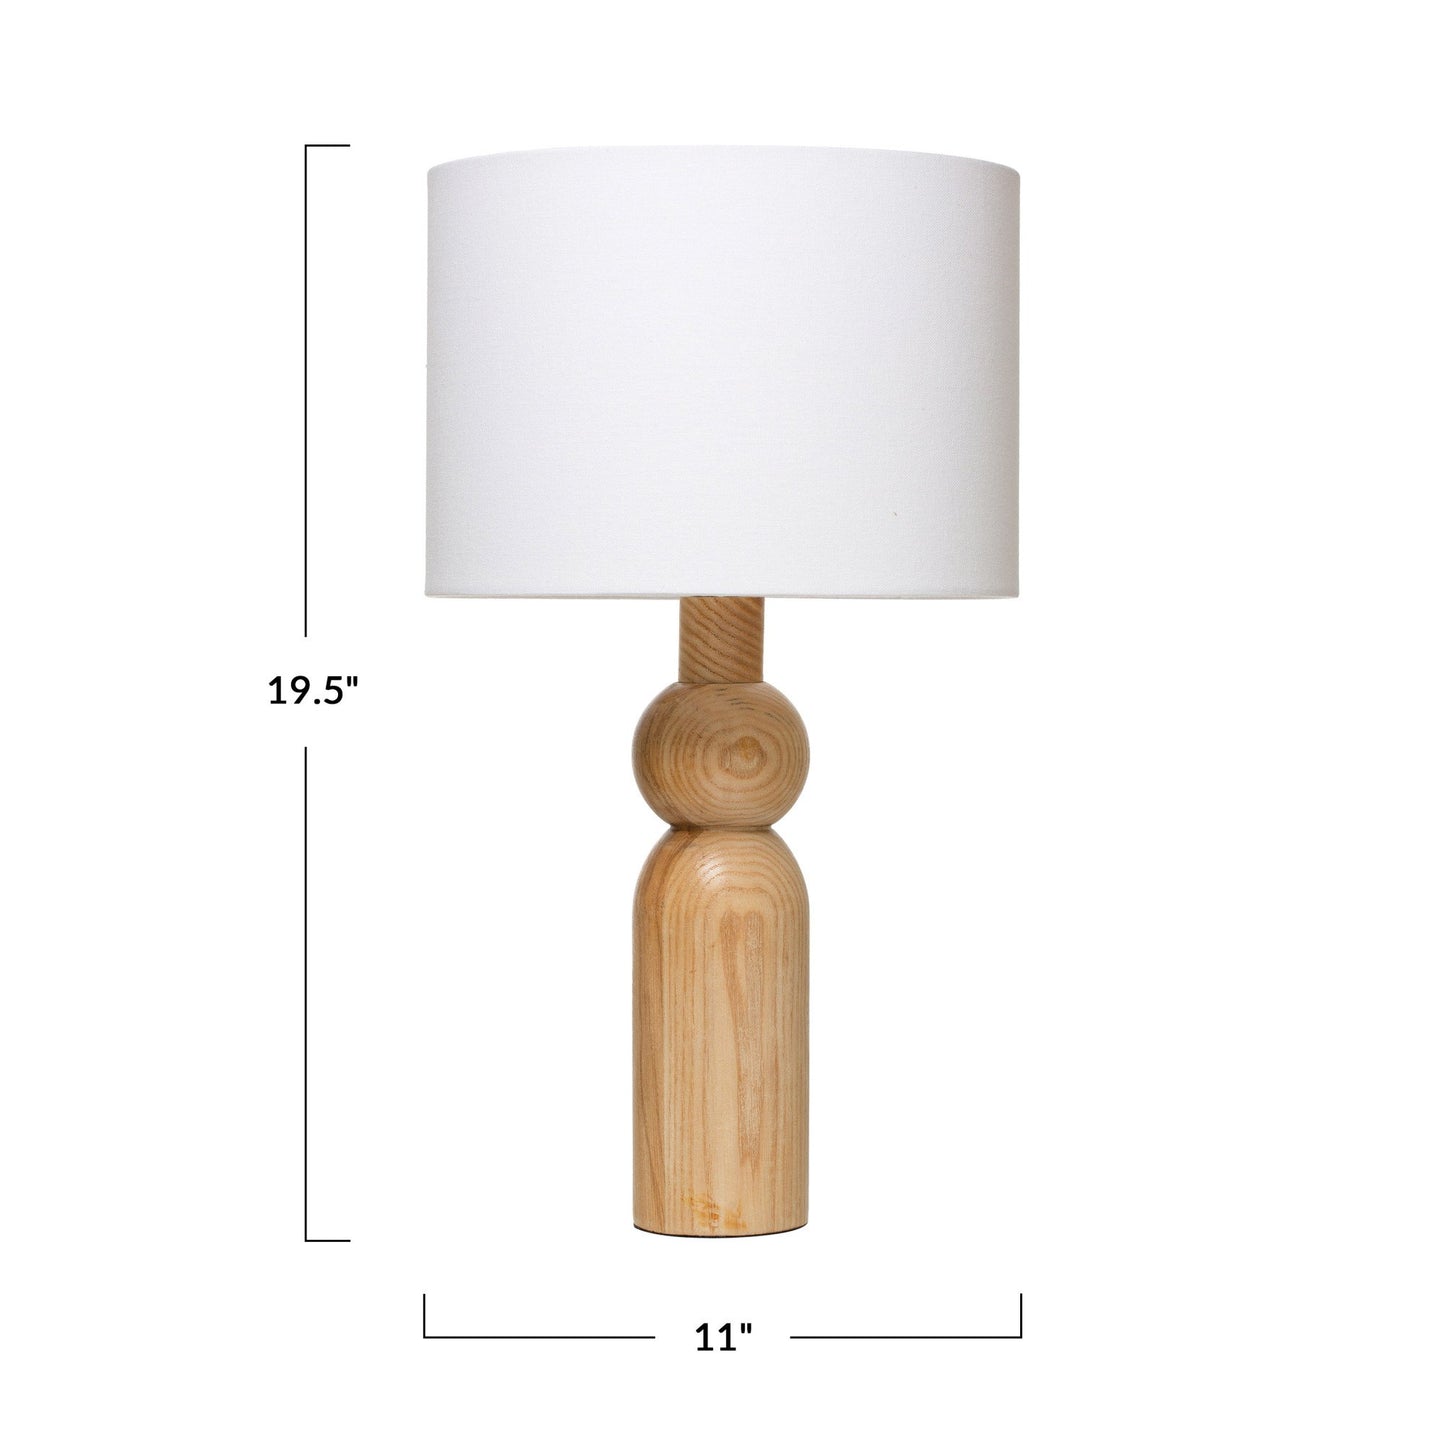 Natural Wood Table with Linen Shade Lamp